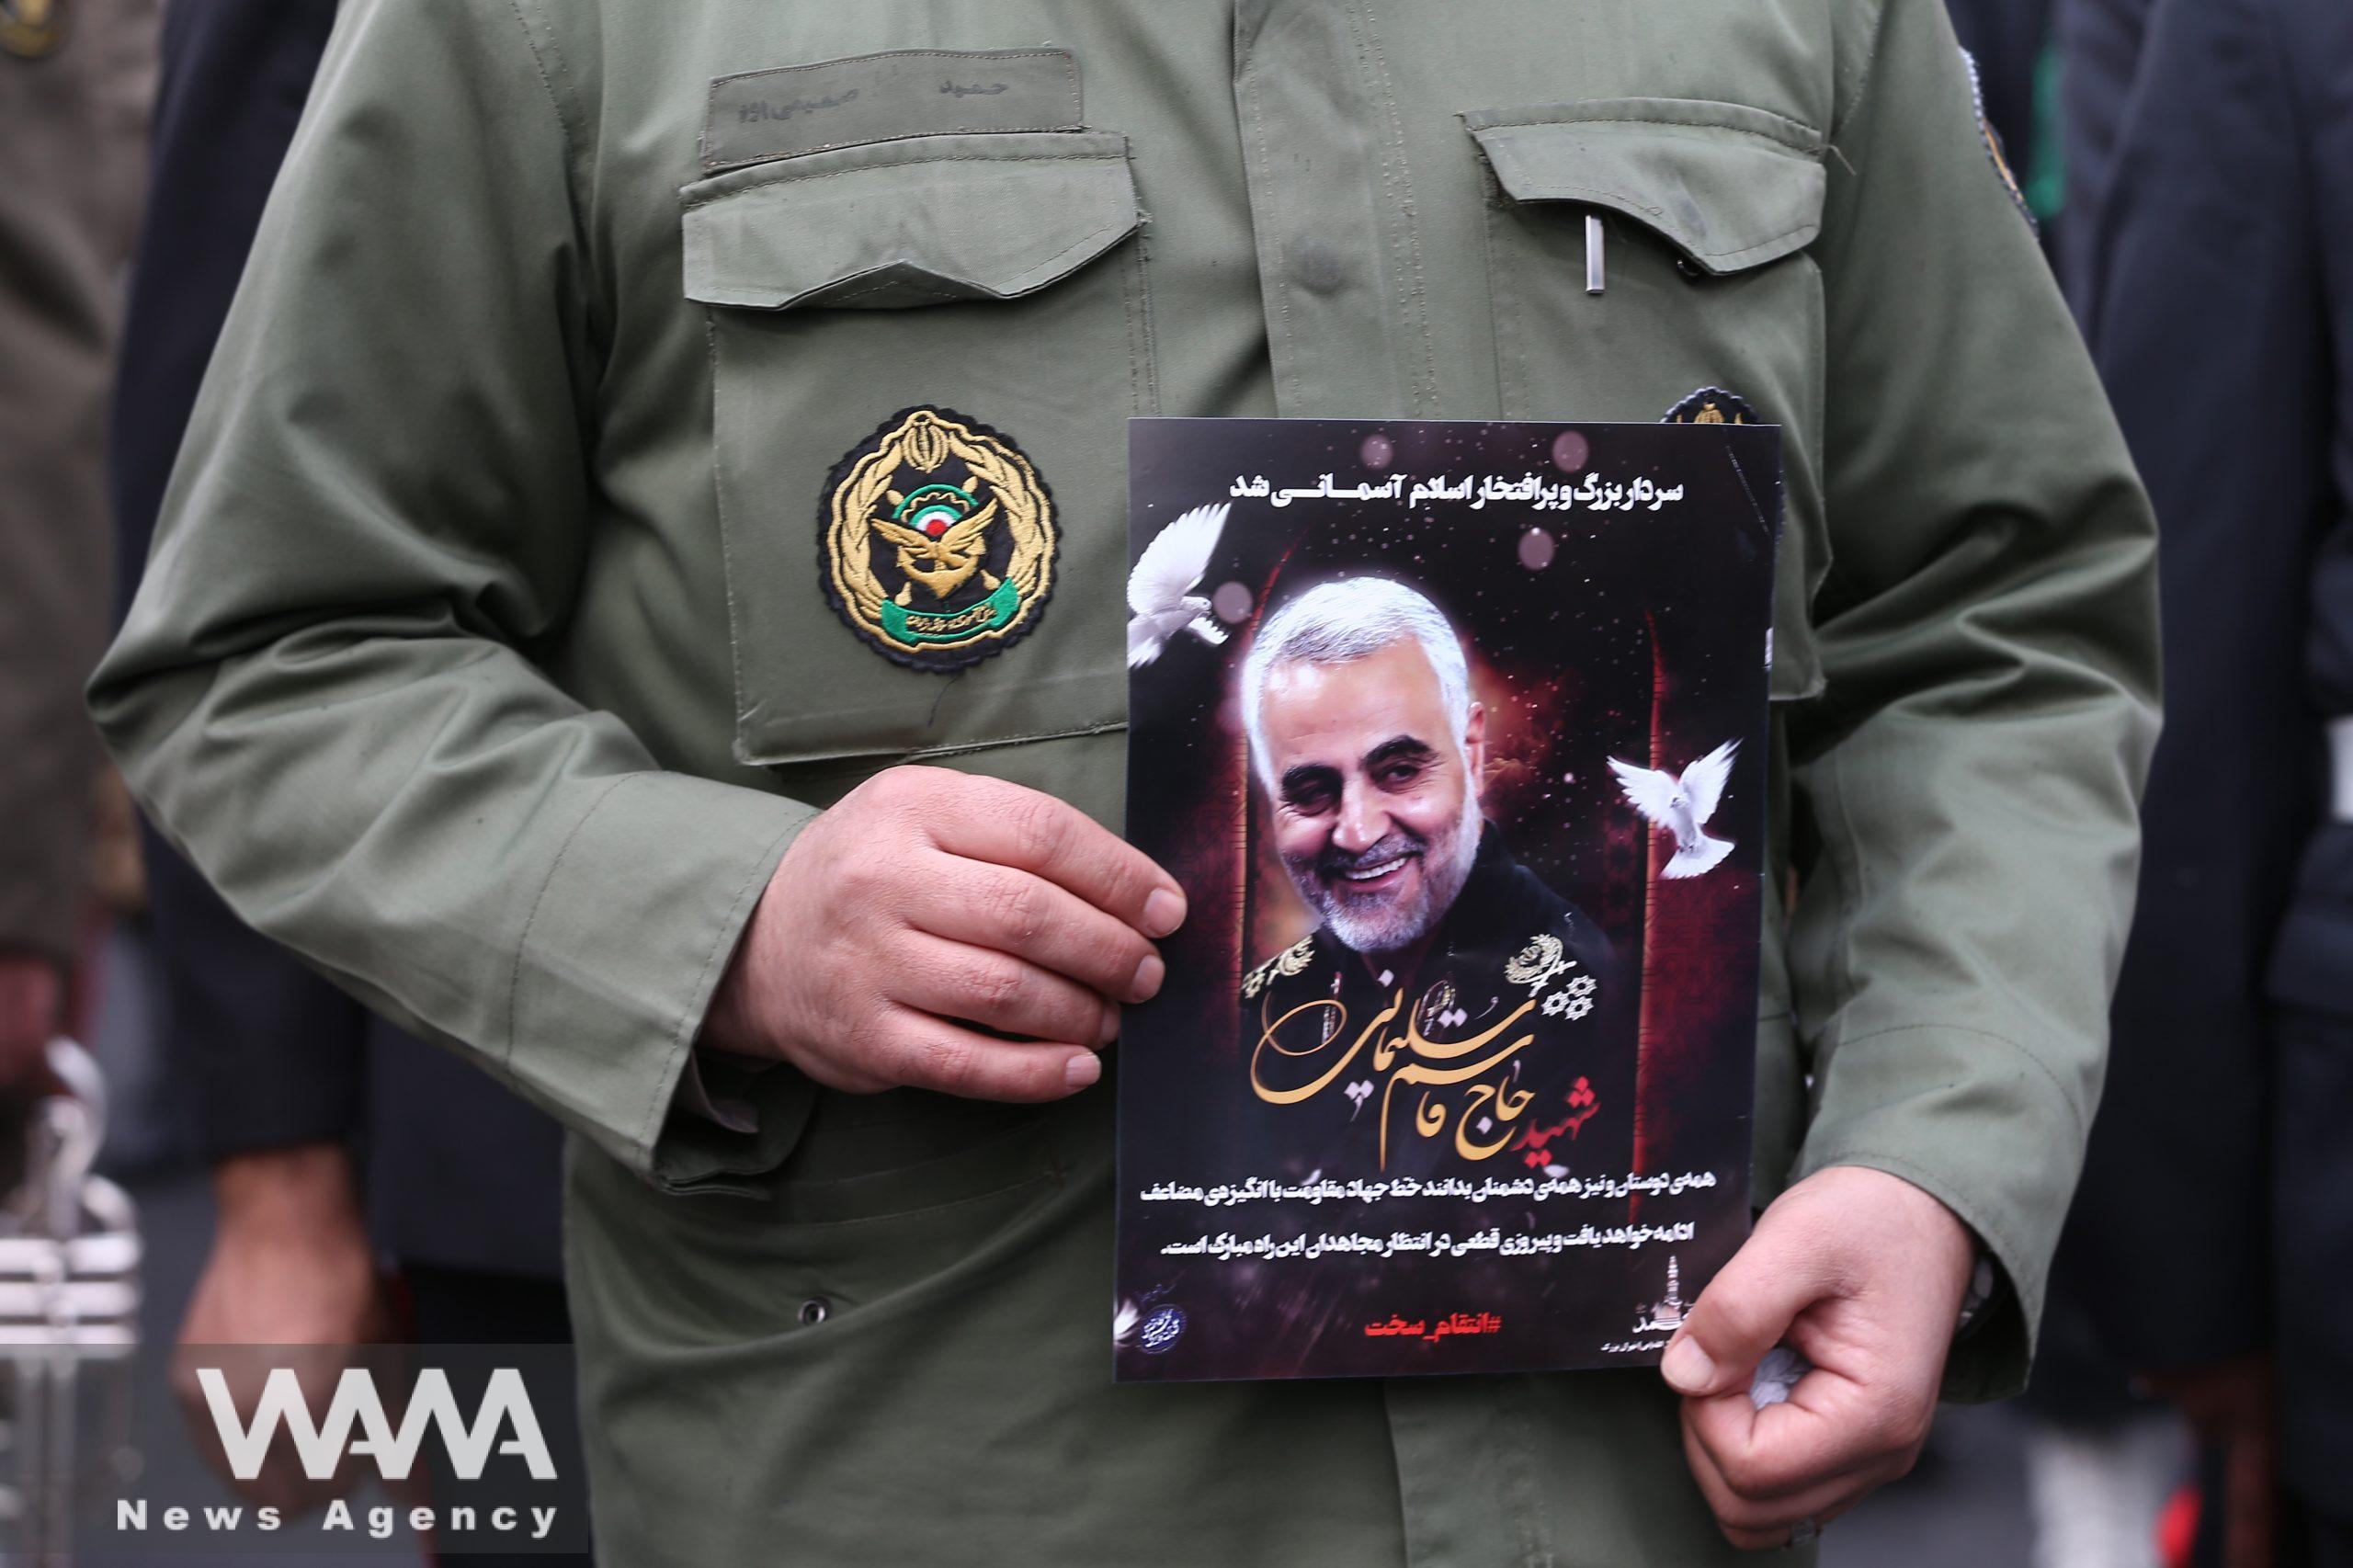 An Iranian guard holds a picture of the late Iranian Major-General Qassem Soleimani during the gathering to mourn for General Qassem Soleimani head of the elite Quds Force, and Iraqi militia commander Abu Mahdi al-Muhandis, who were killed in an air strike at Baghdad airport, in Tehran, Iran January 4, 2020. Nazanin Tabatabaee/WANA (West Asia News Agency)